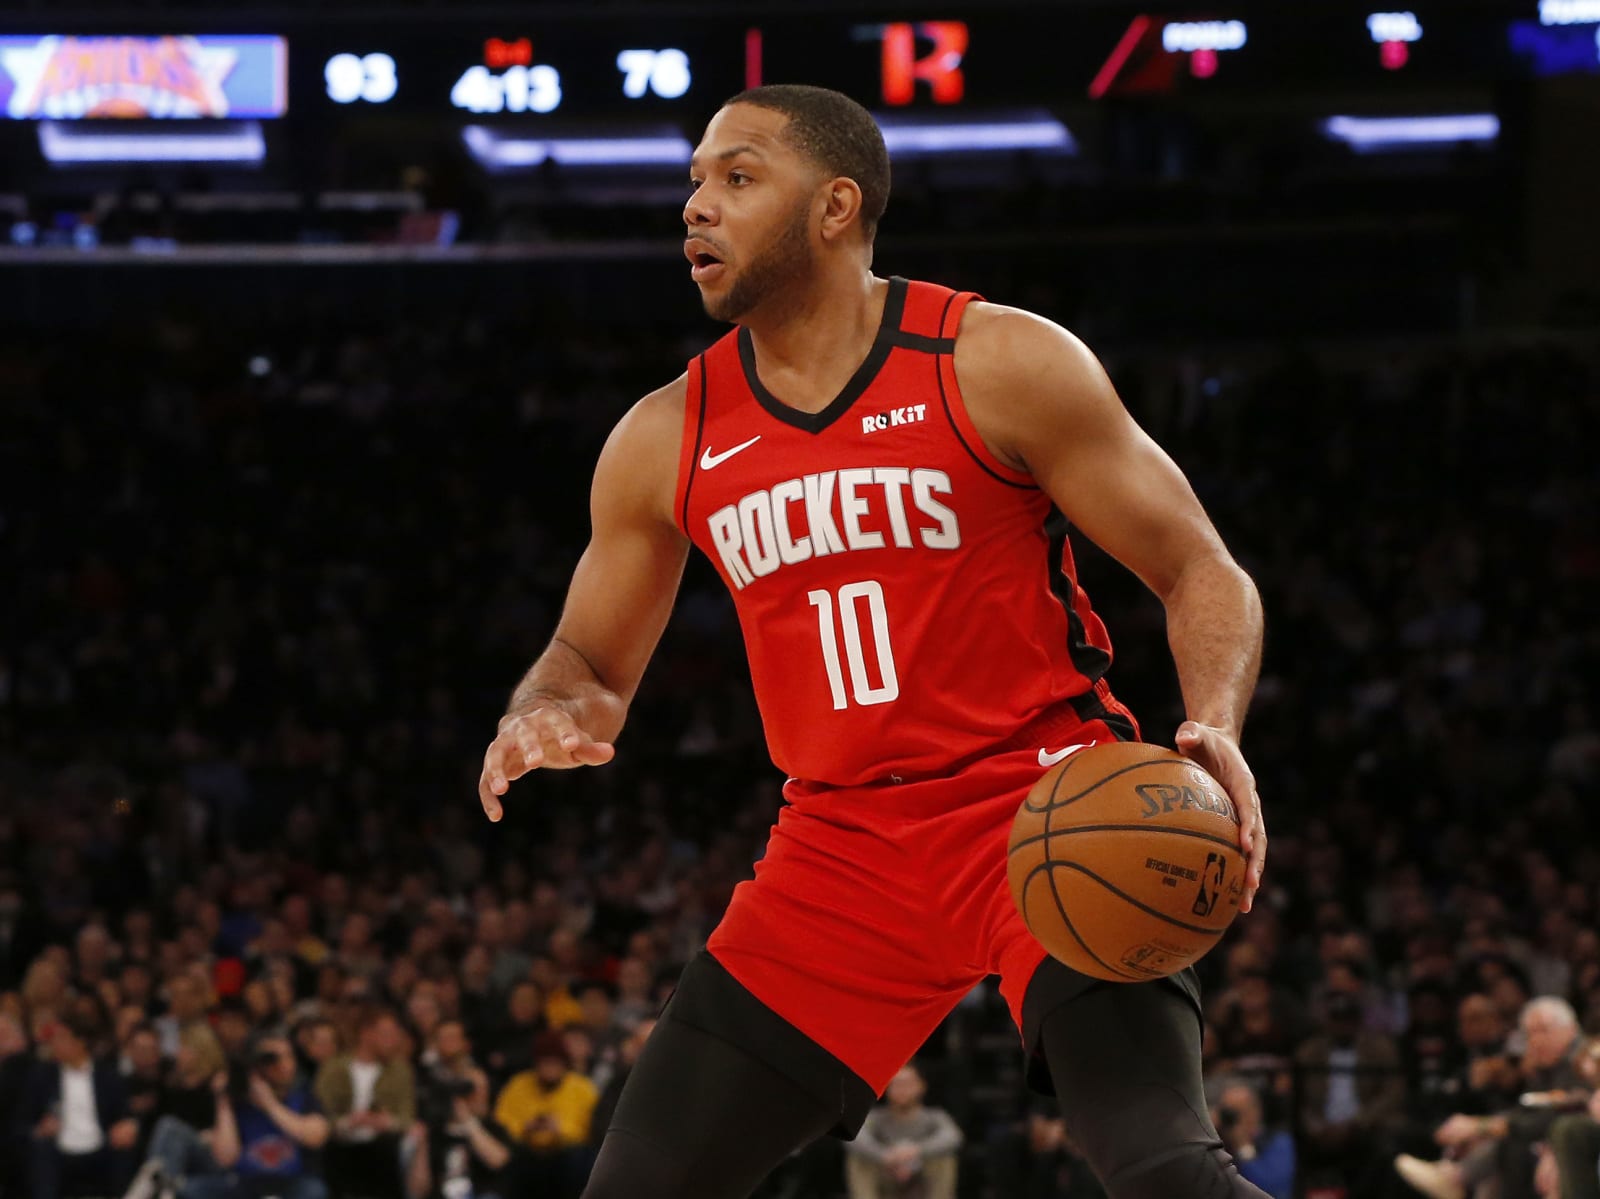 Eric Gordon Is Open To Trade From Rockets, Team Wants Him To Stay Put